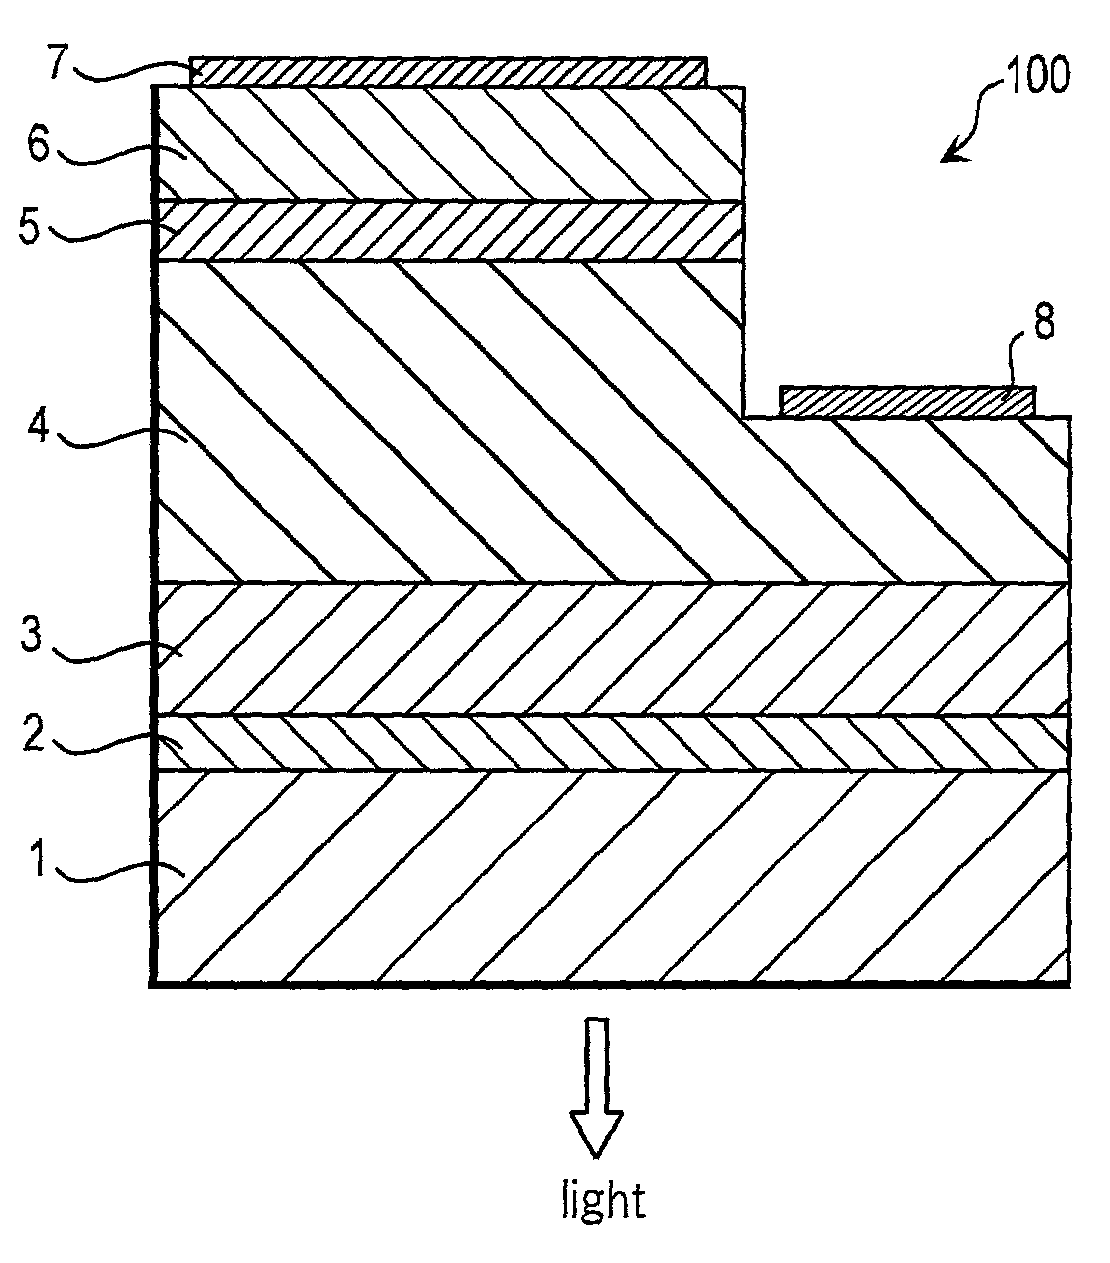 Semiconductor light-emitting device and methods for fabricating the same